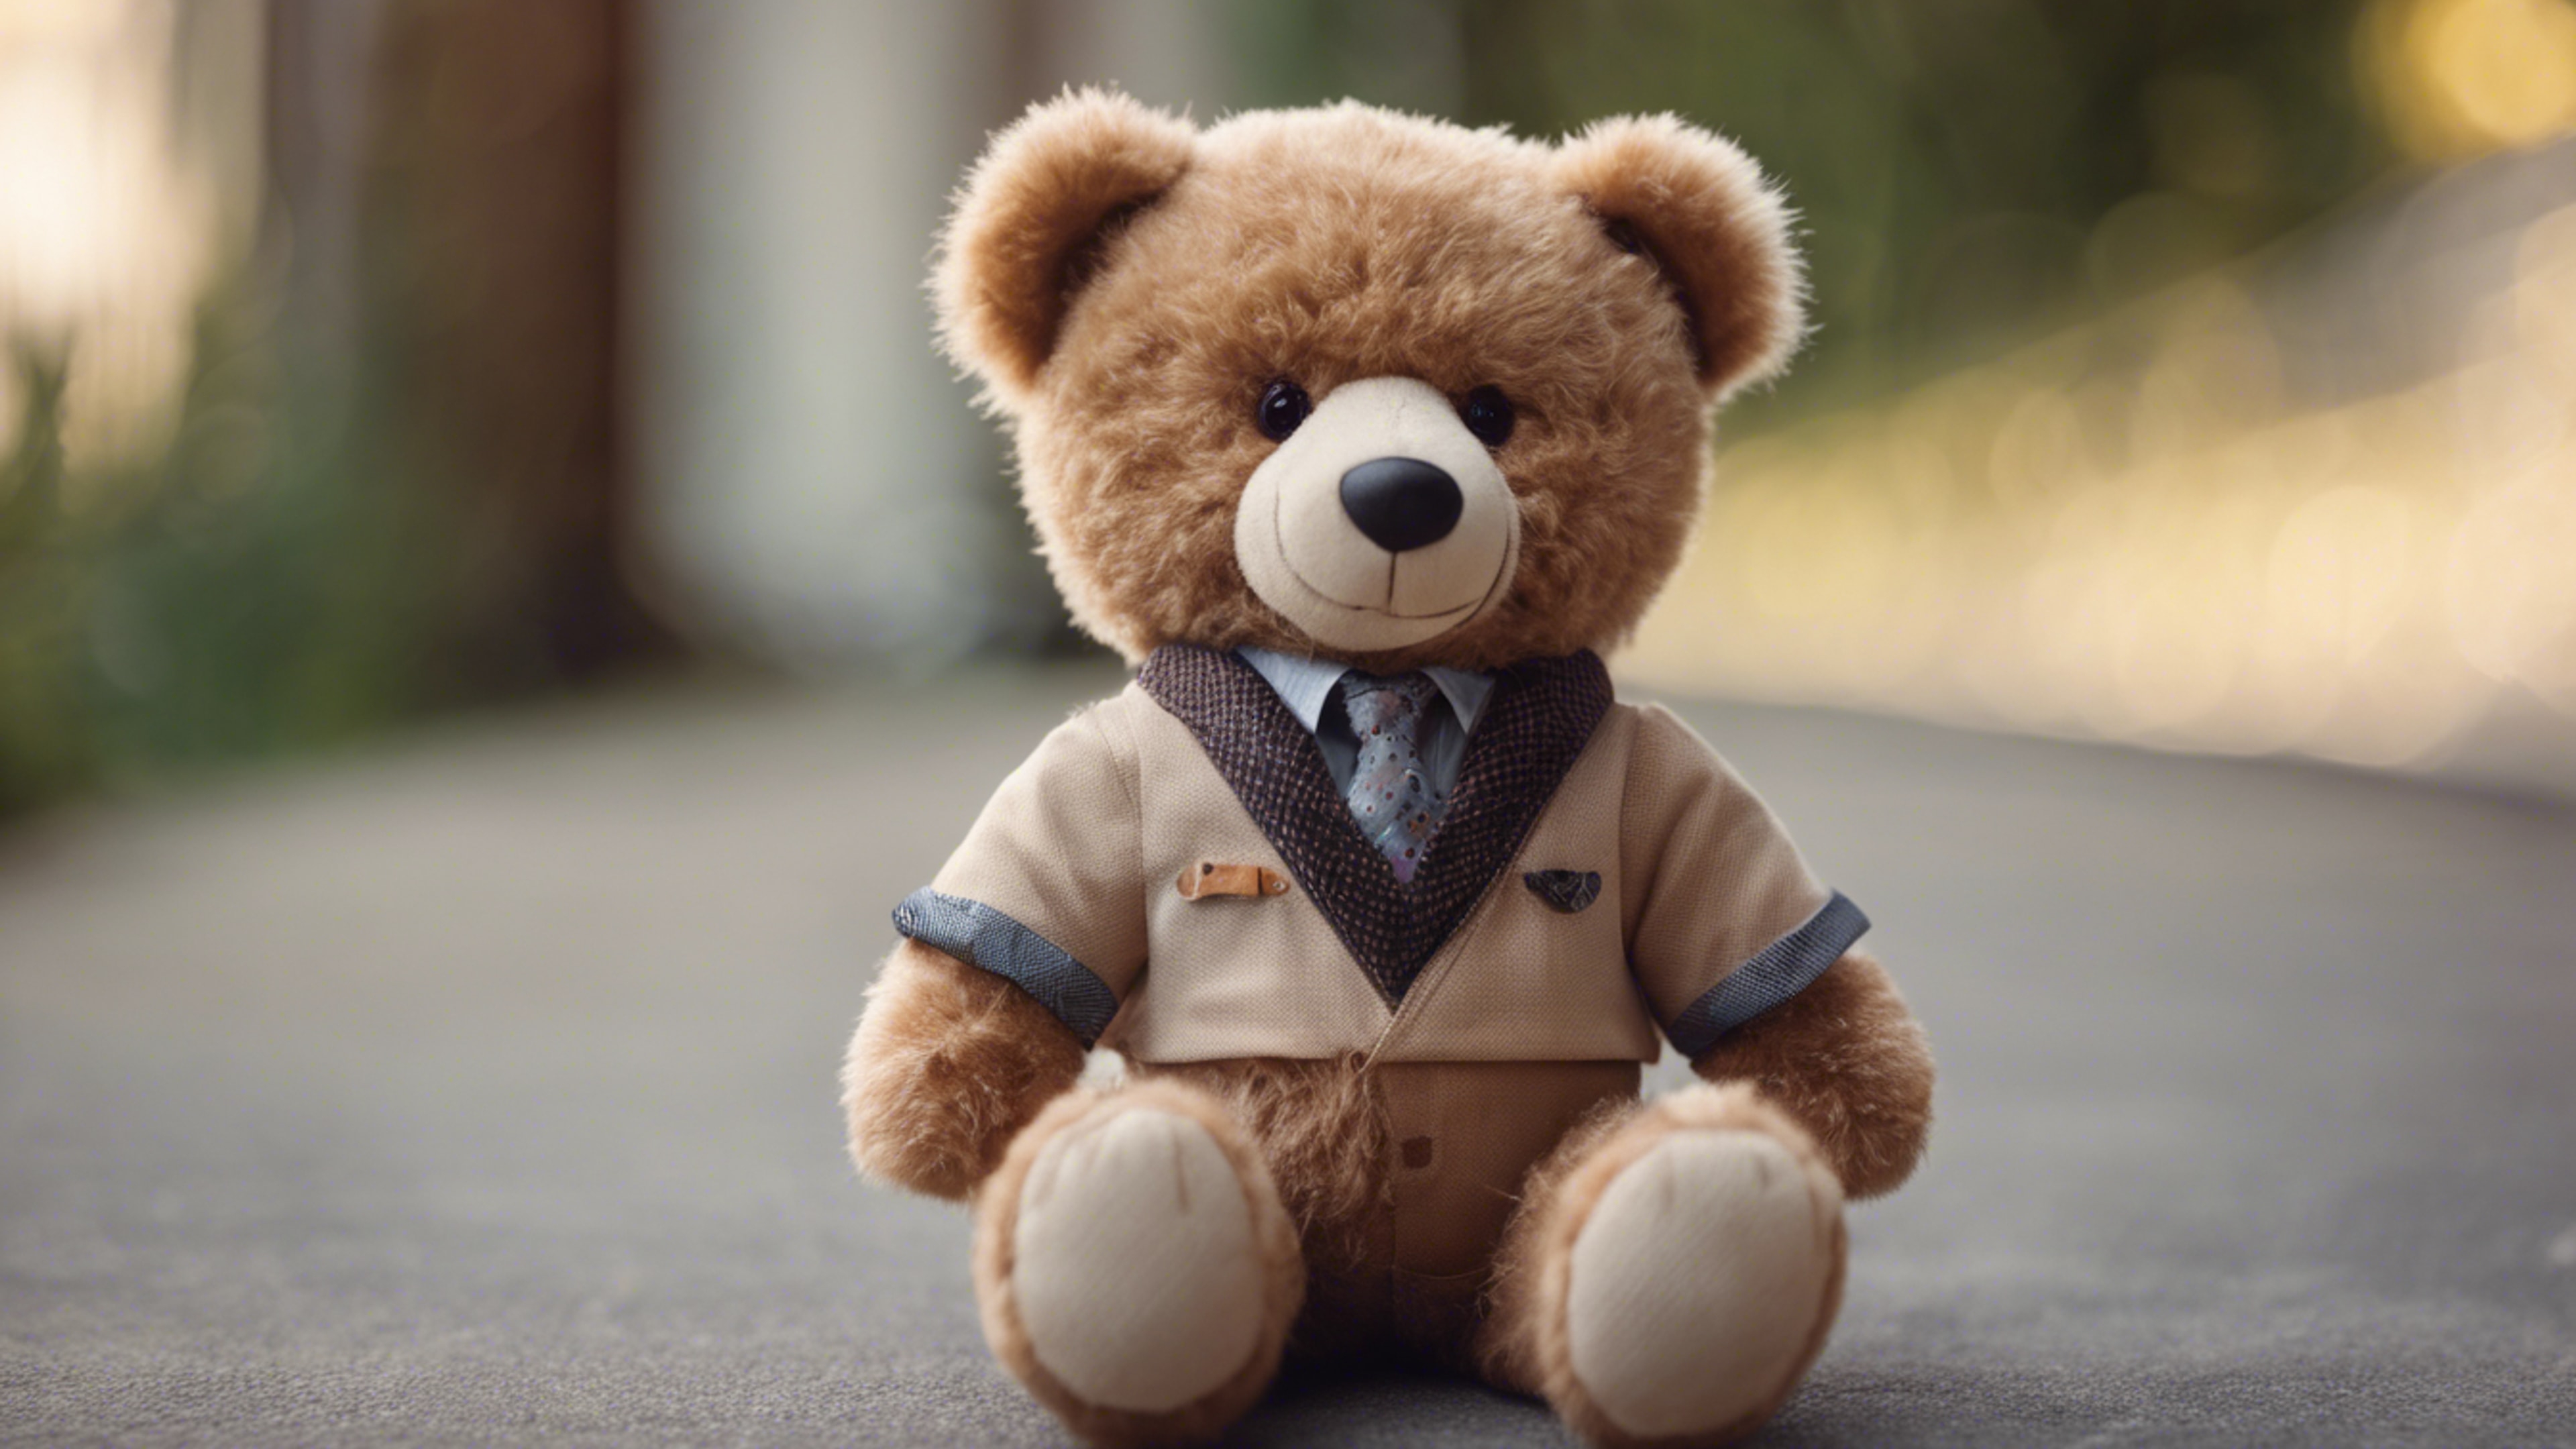 A teddy bear with light brown fur wearing a preppy outfit. Тапет[c4dfc3c378844a52a1e6]